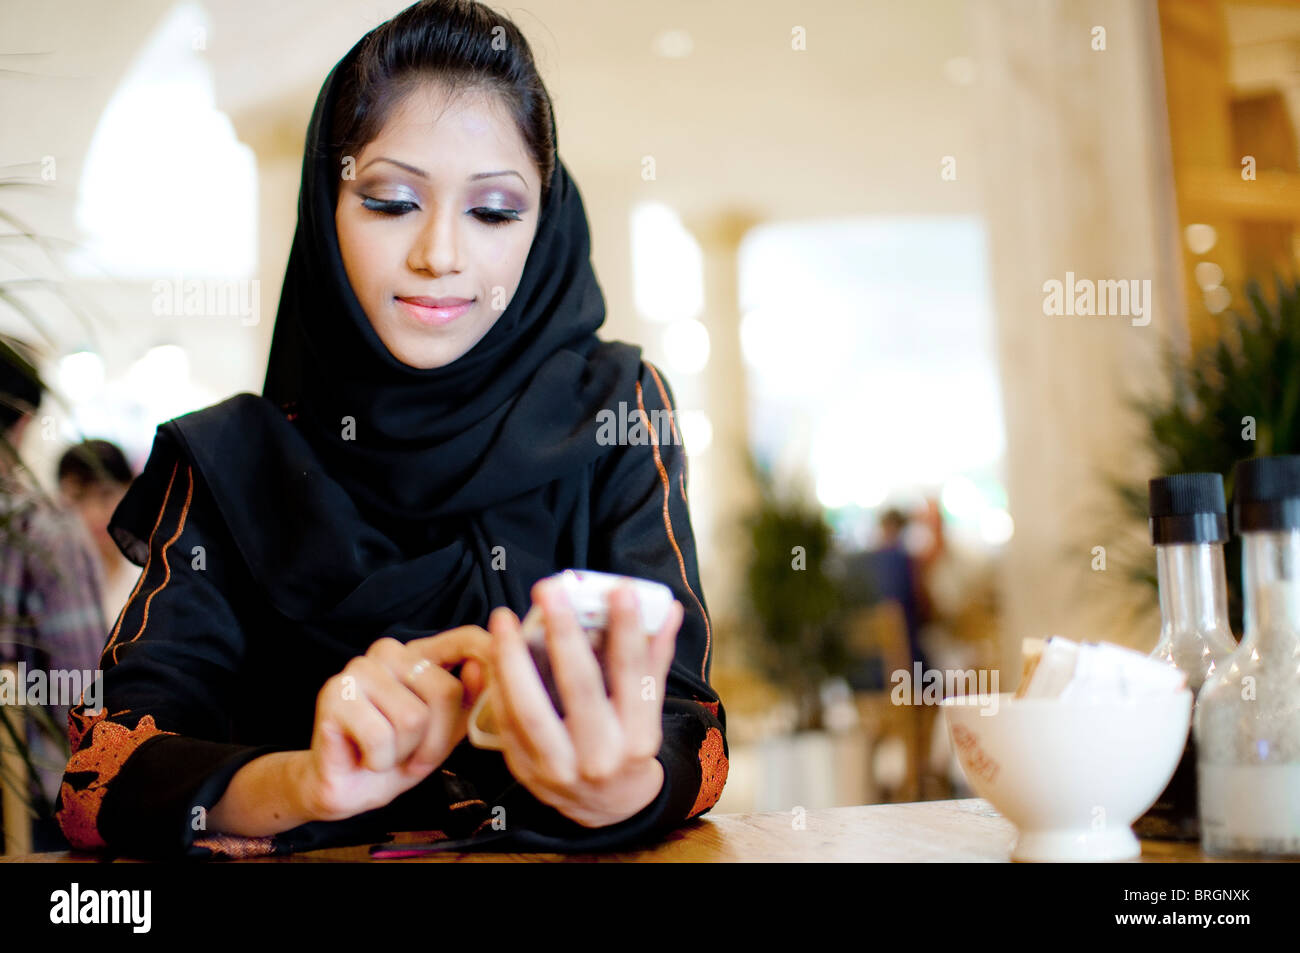 Wealthy modern young liberated arab woman wearing a burka using mobile app or texting or signing up in bright coffee shop Stock Photo